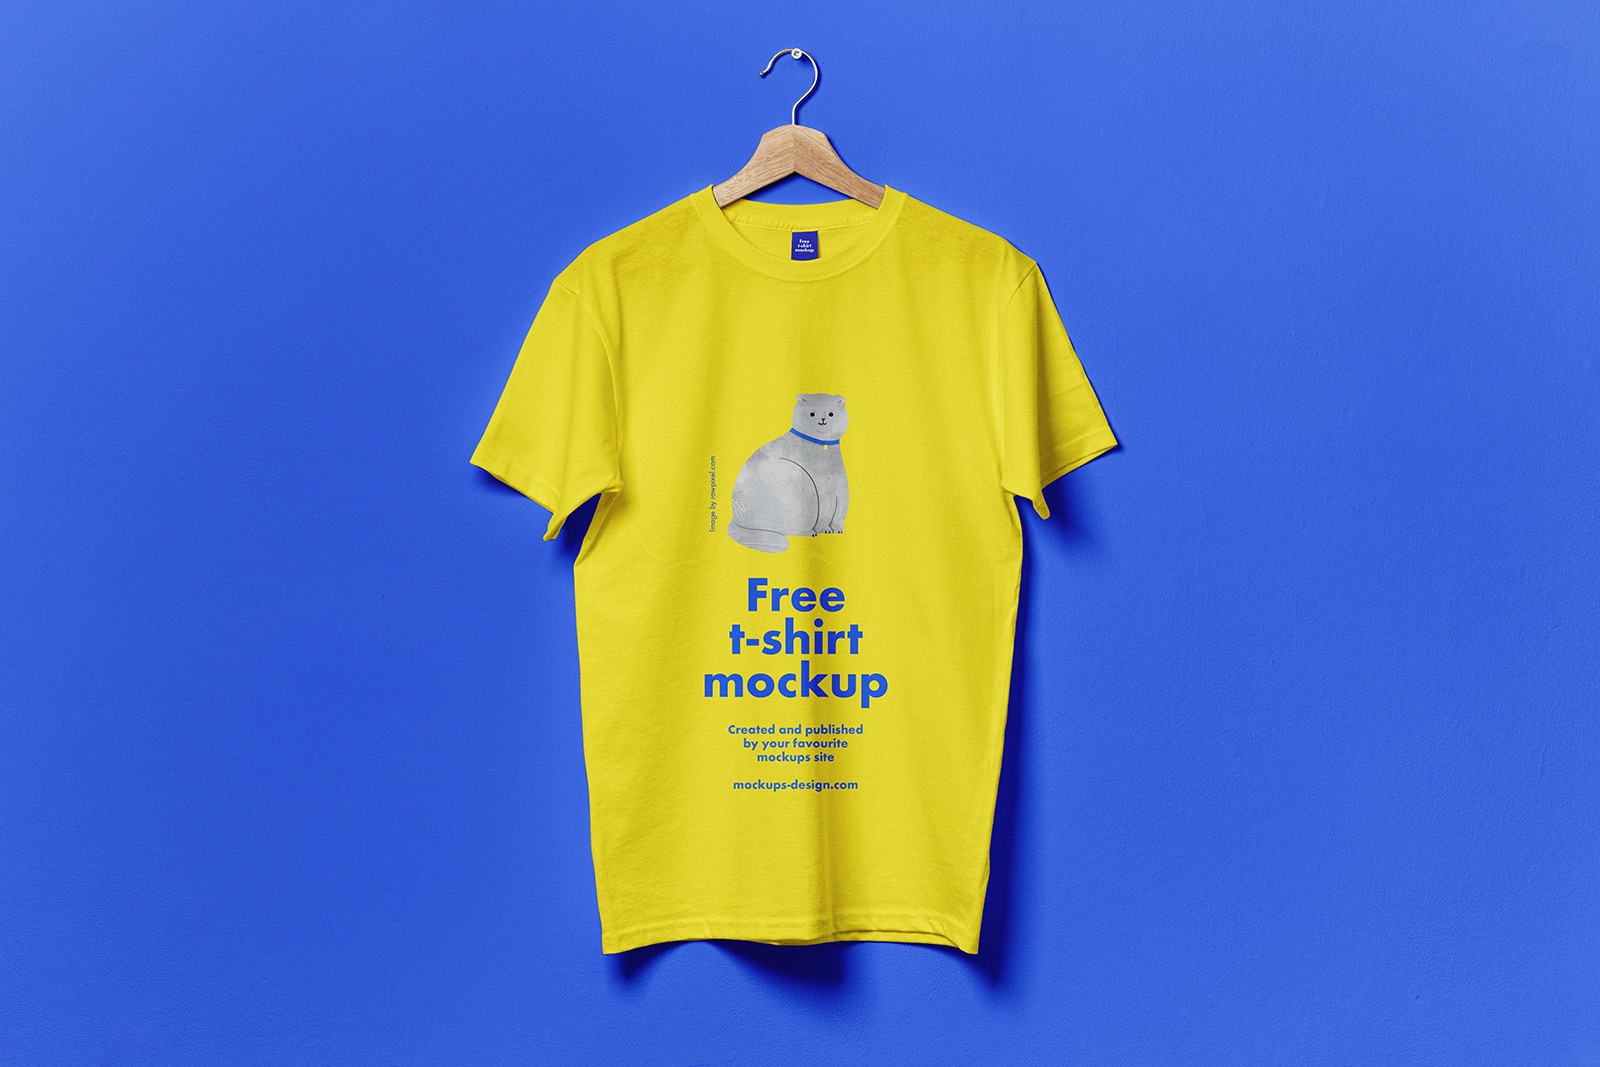 switch Rally Menagerry Free hanging t-shirt mockup - Mockups Design